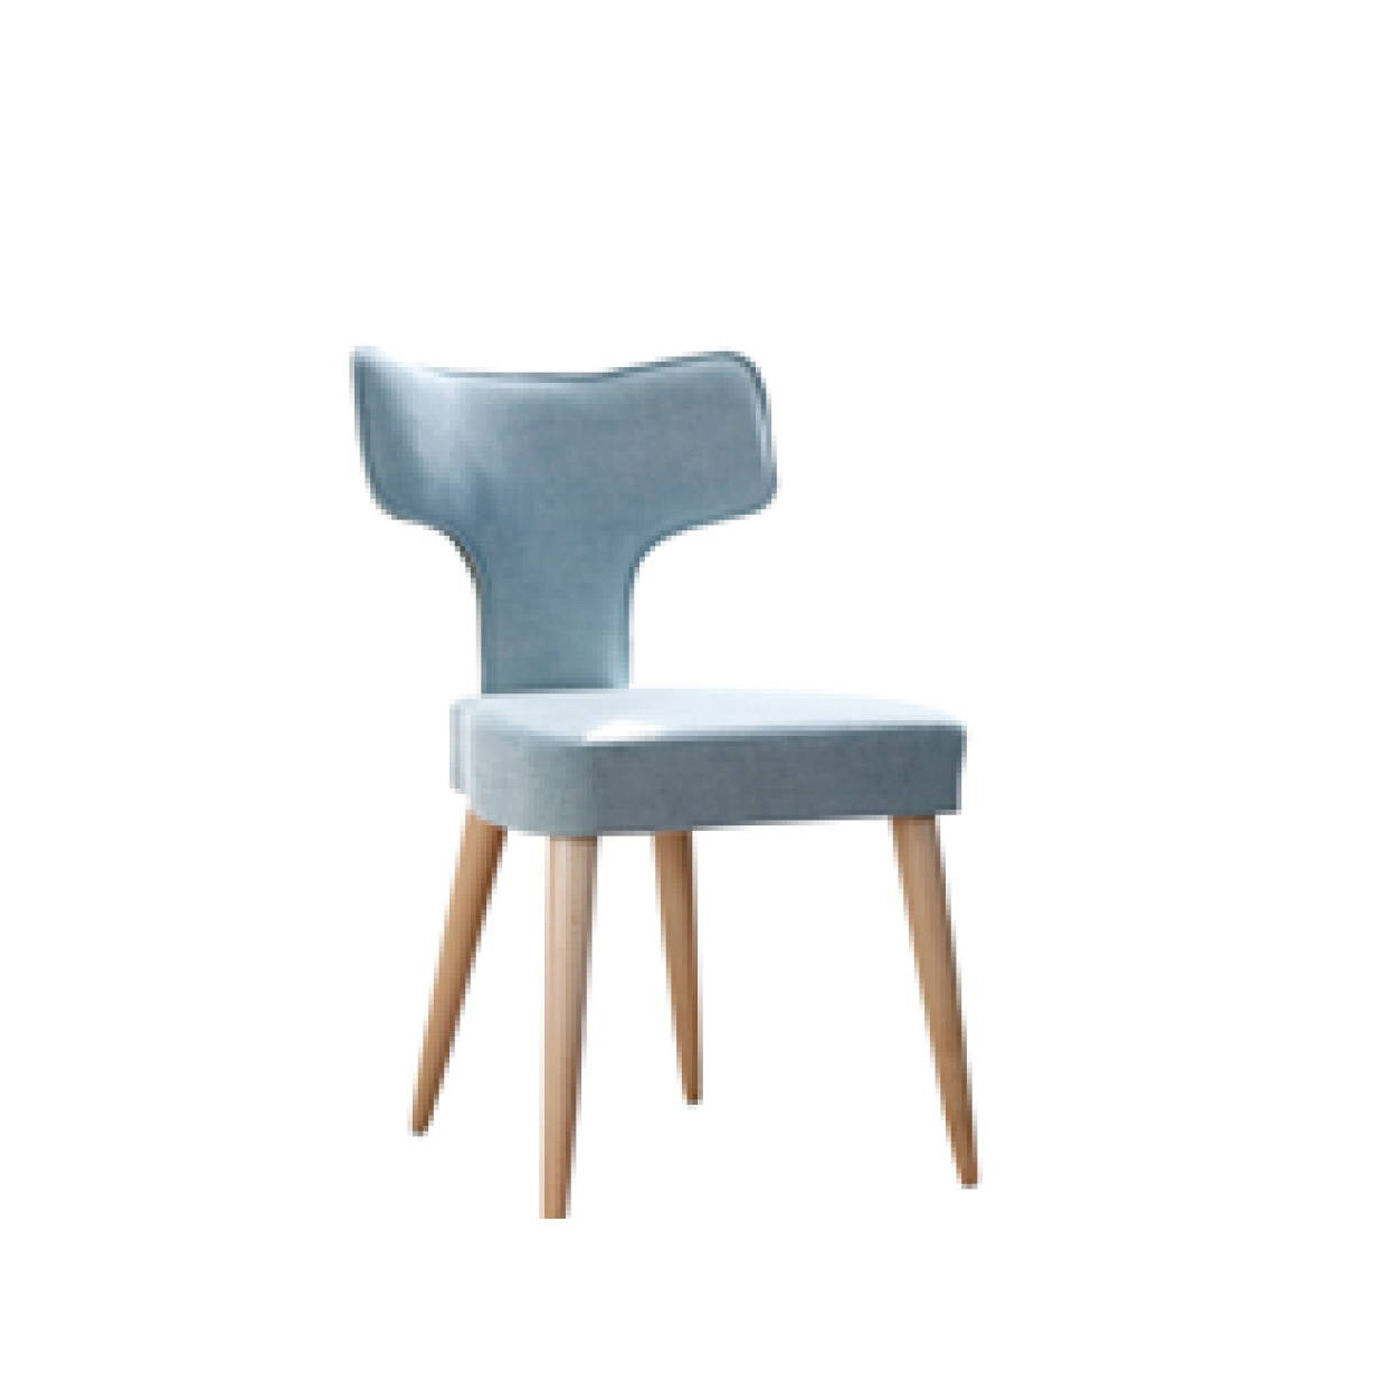 Shop Fama Dining Chairs Such As The Mili & Lalo& Recliners